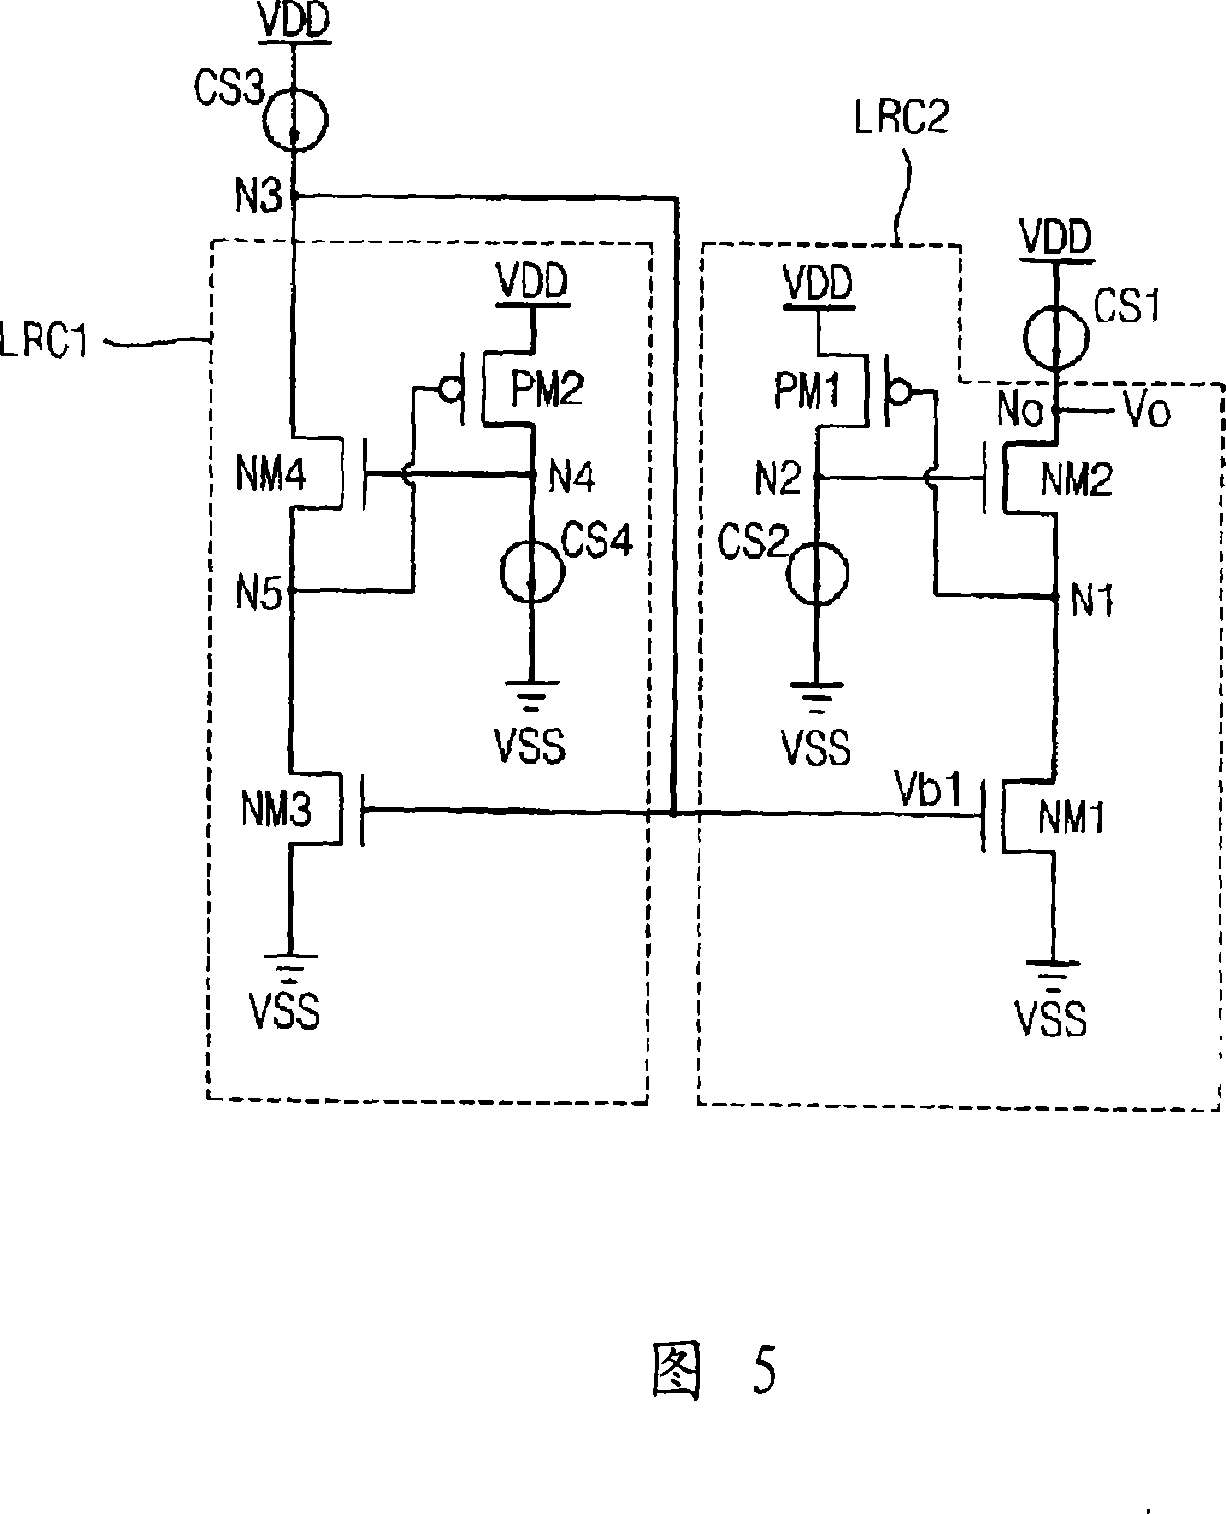 Regulated cascode circuits and cmos analog circuits include the same